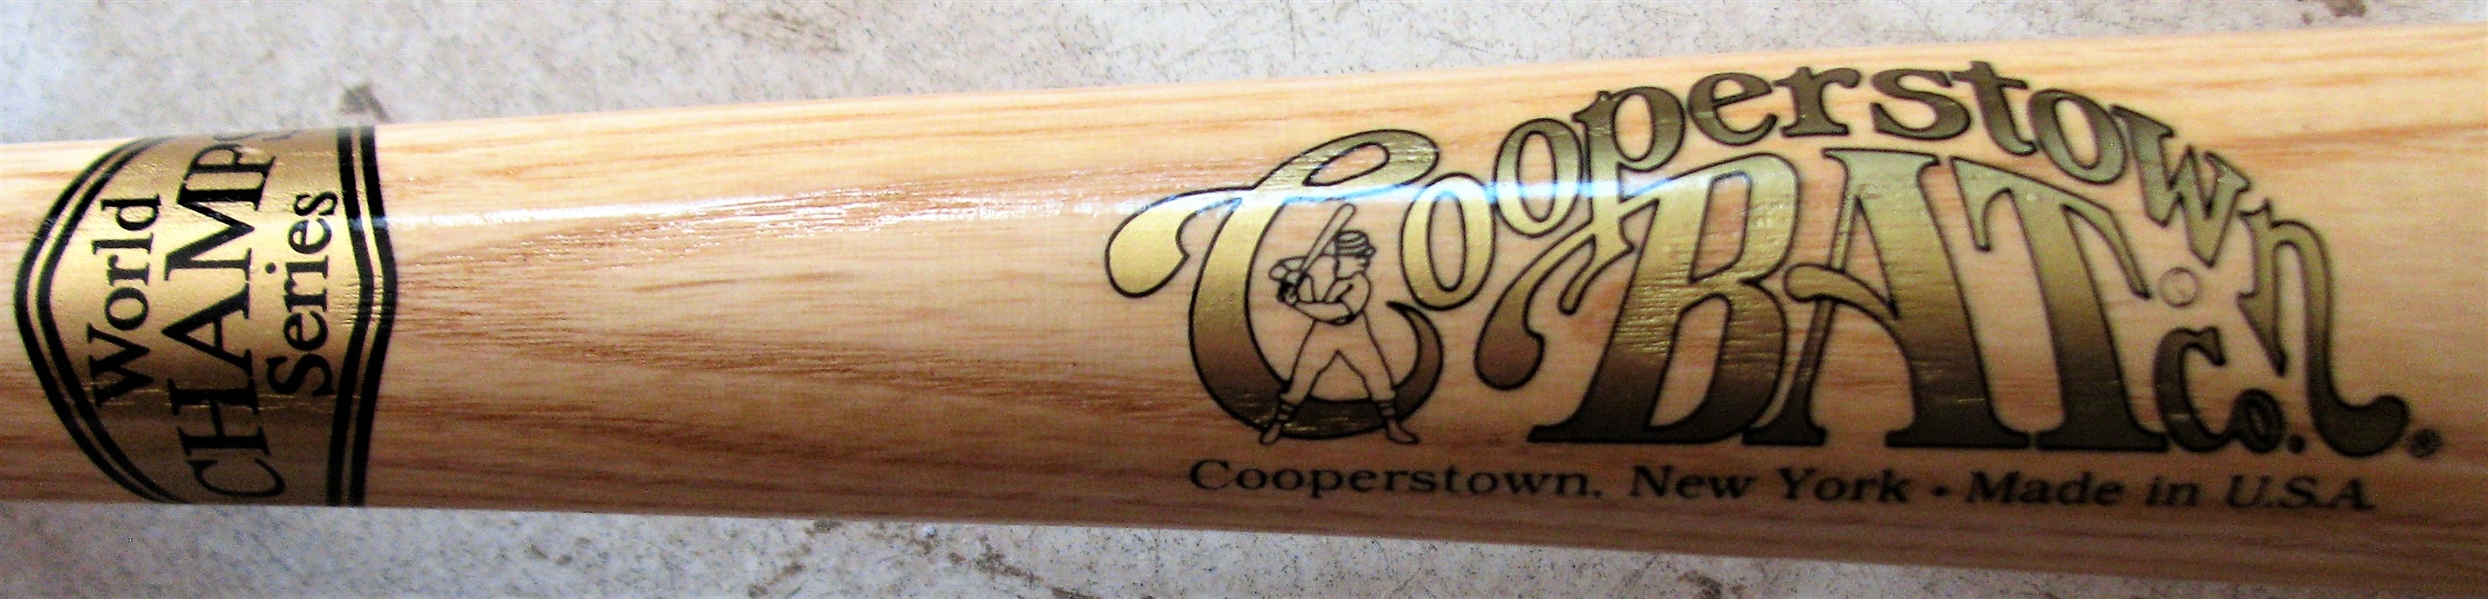 1998 NY YANKEES WORLD CHAMPIONS COOPERSTOWN BAT